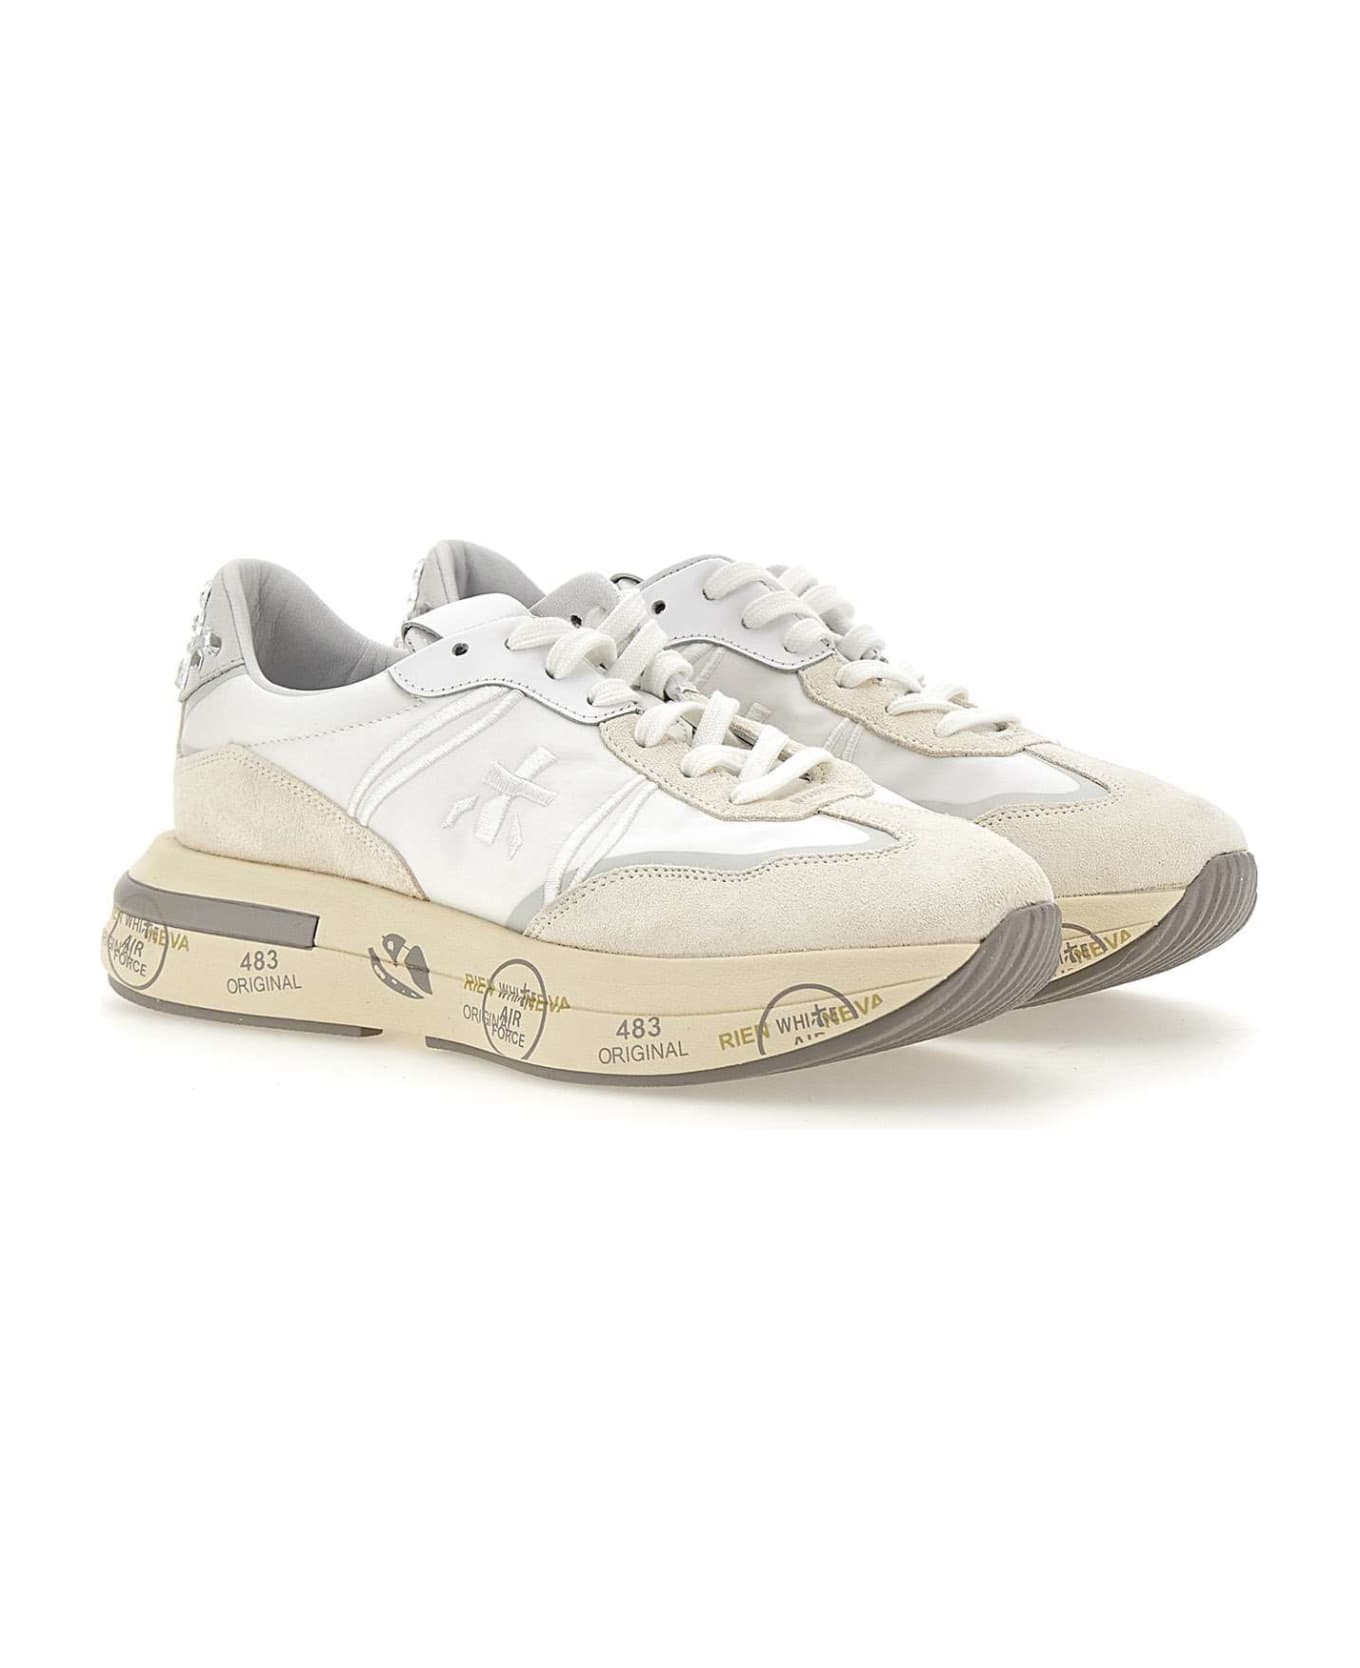 Premiata "cassie 6717" Leather And Fabric Sneakers - WHITE スニーカー